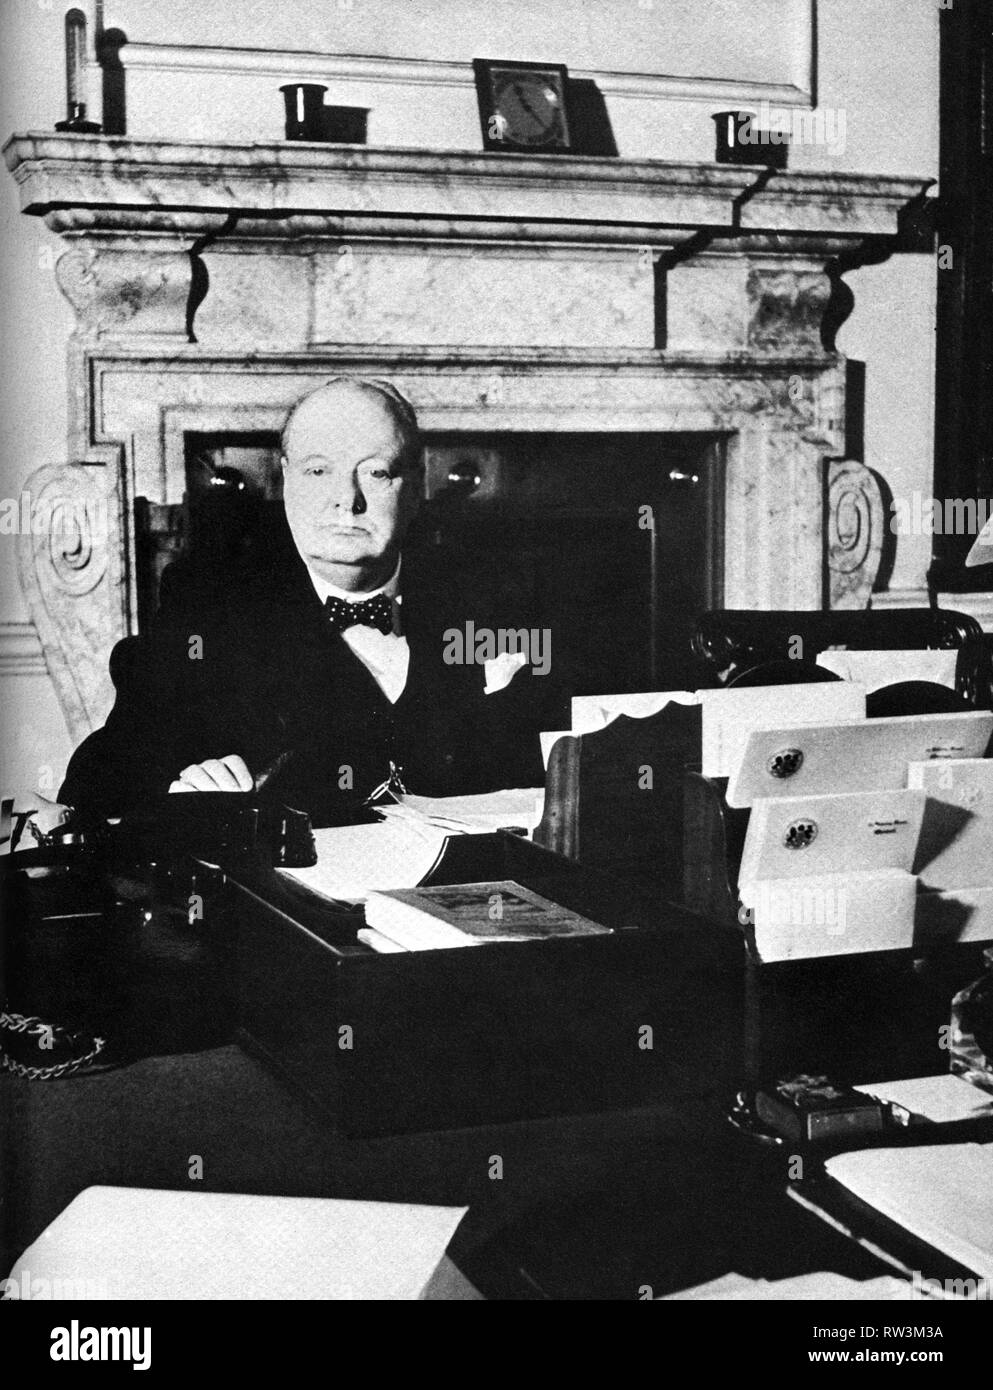 Winston Churchill As The New Prime Minister At His Desk In 10